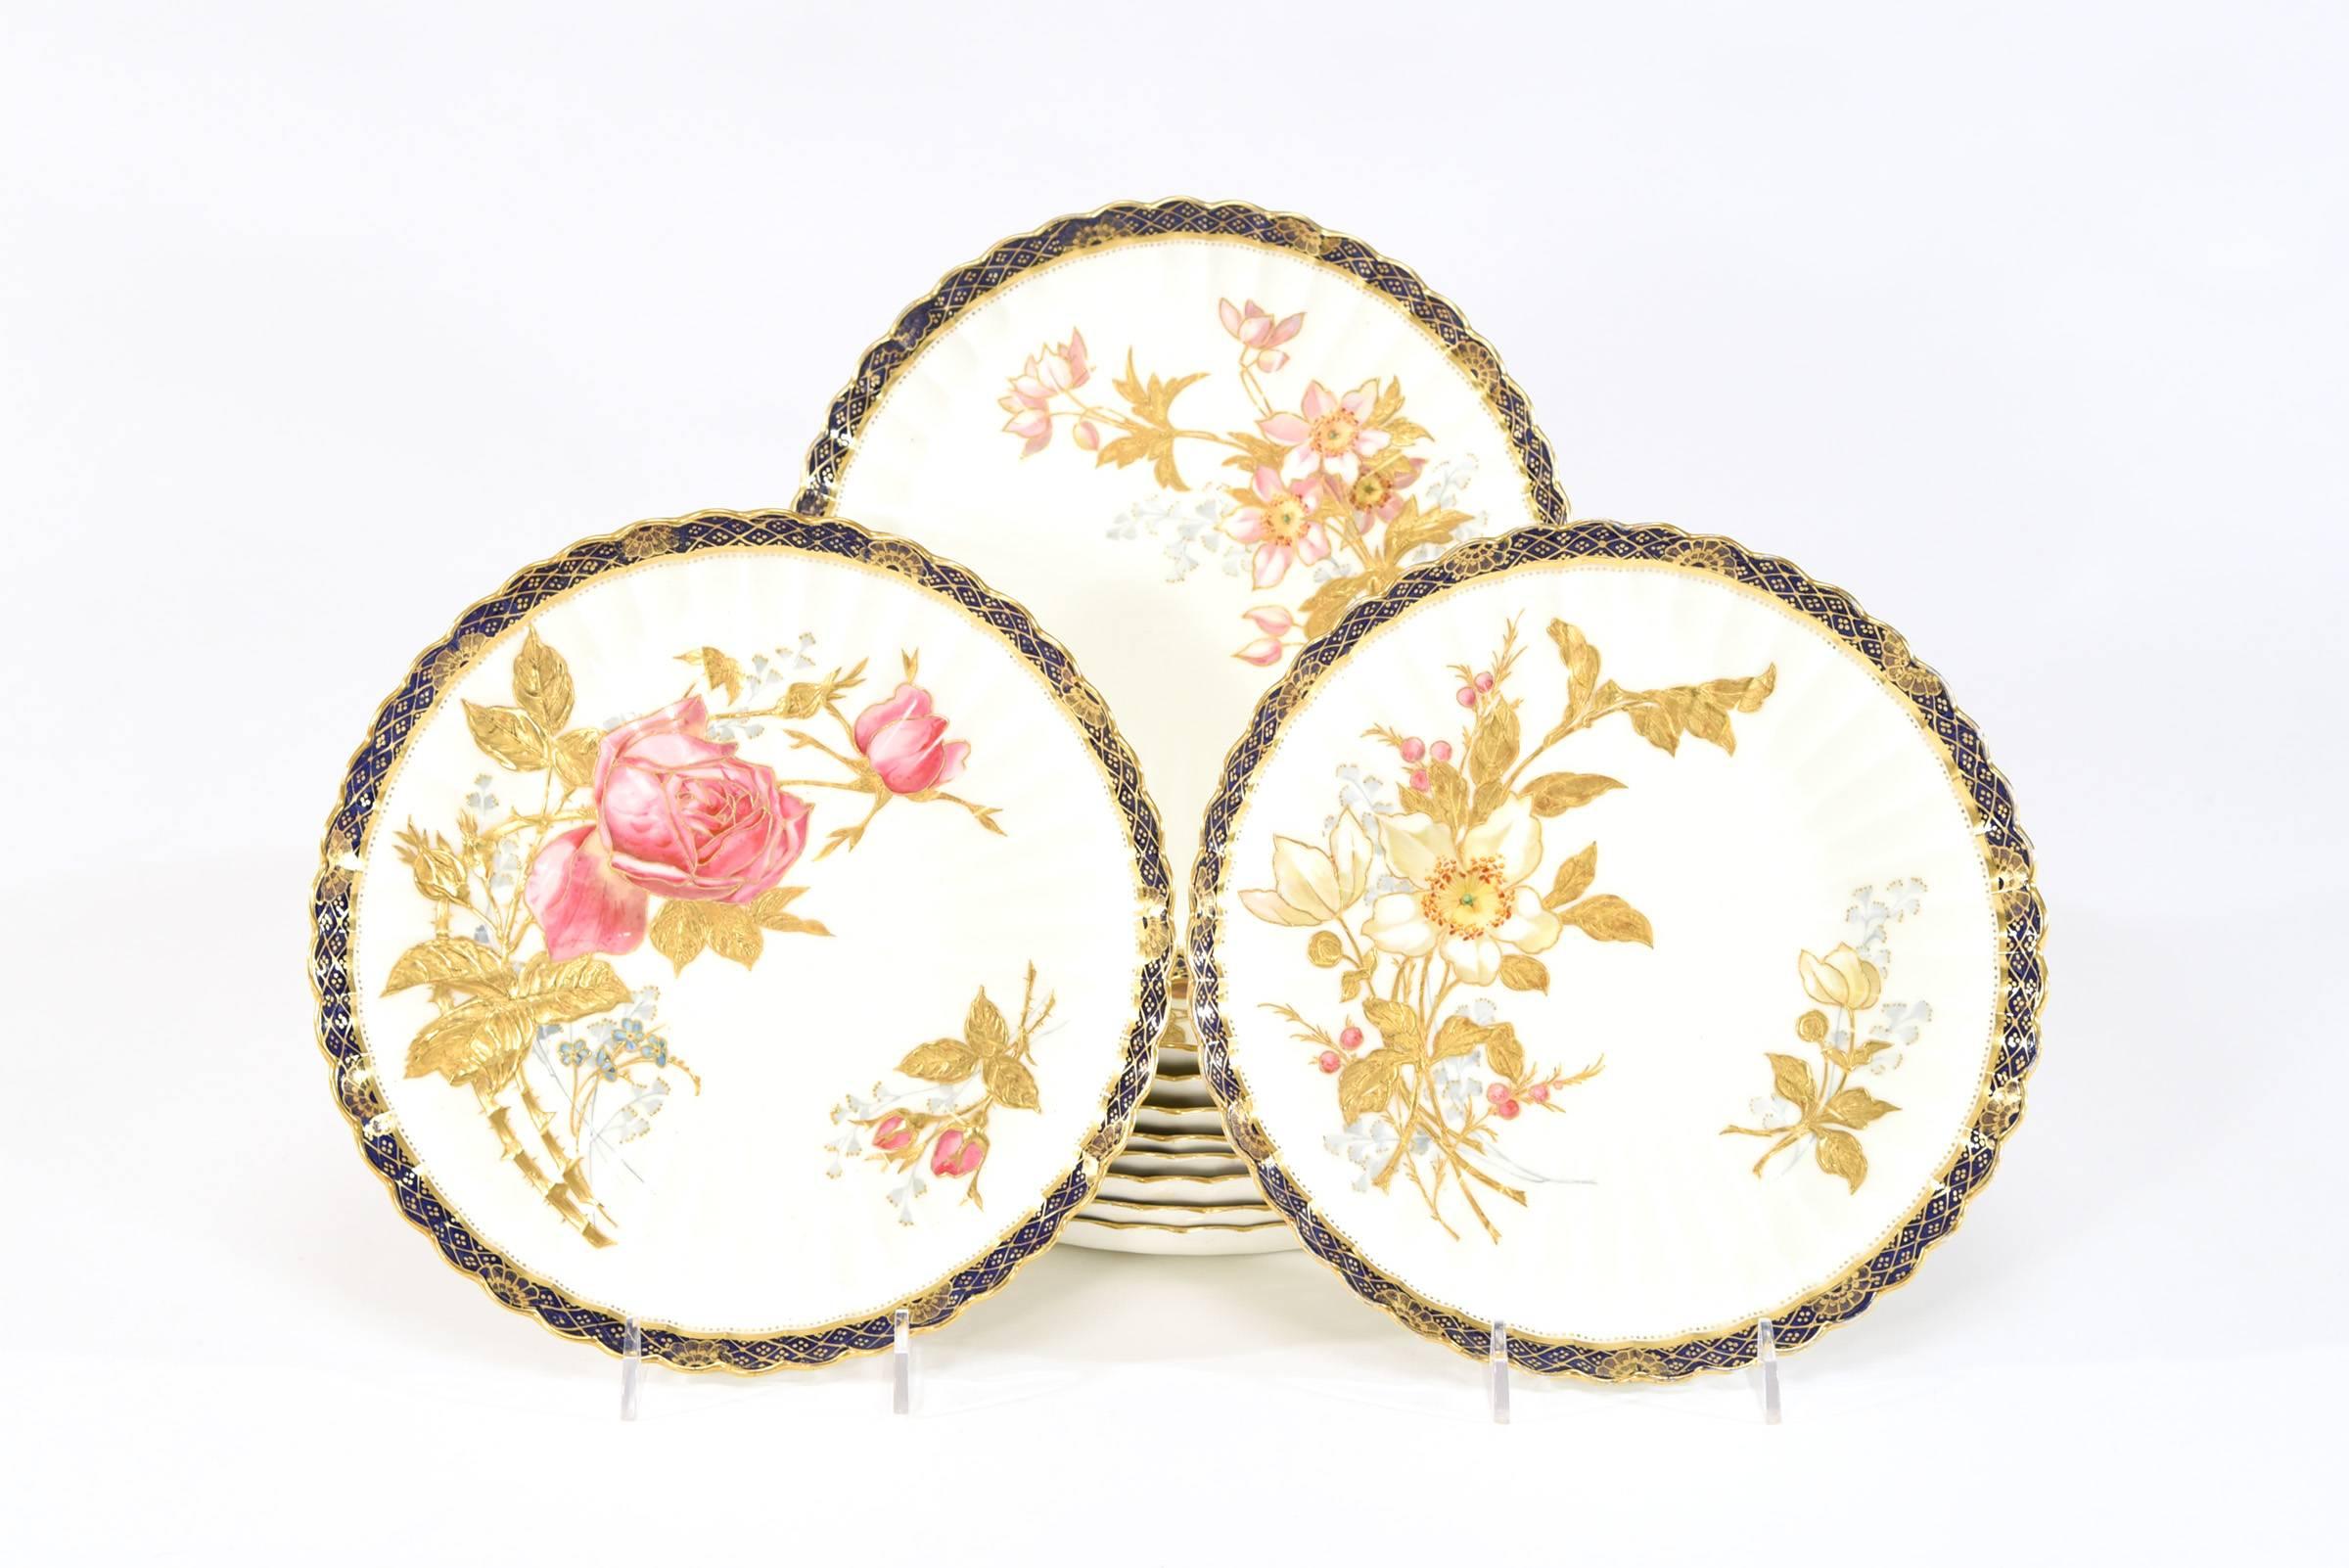 This beautifully decorated dessert set is hand painted with polychrome enamel floral decoration in the iconic Aesthetic Movement style featuring 10 different flowers all placed off center and embellished with raised paste gold. Each plate is